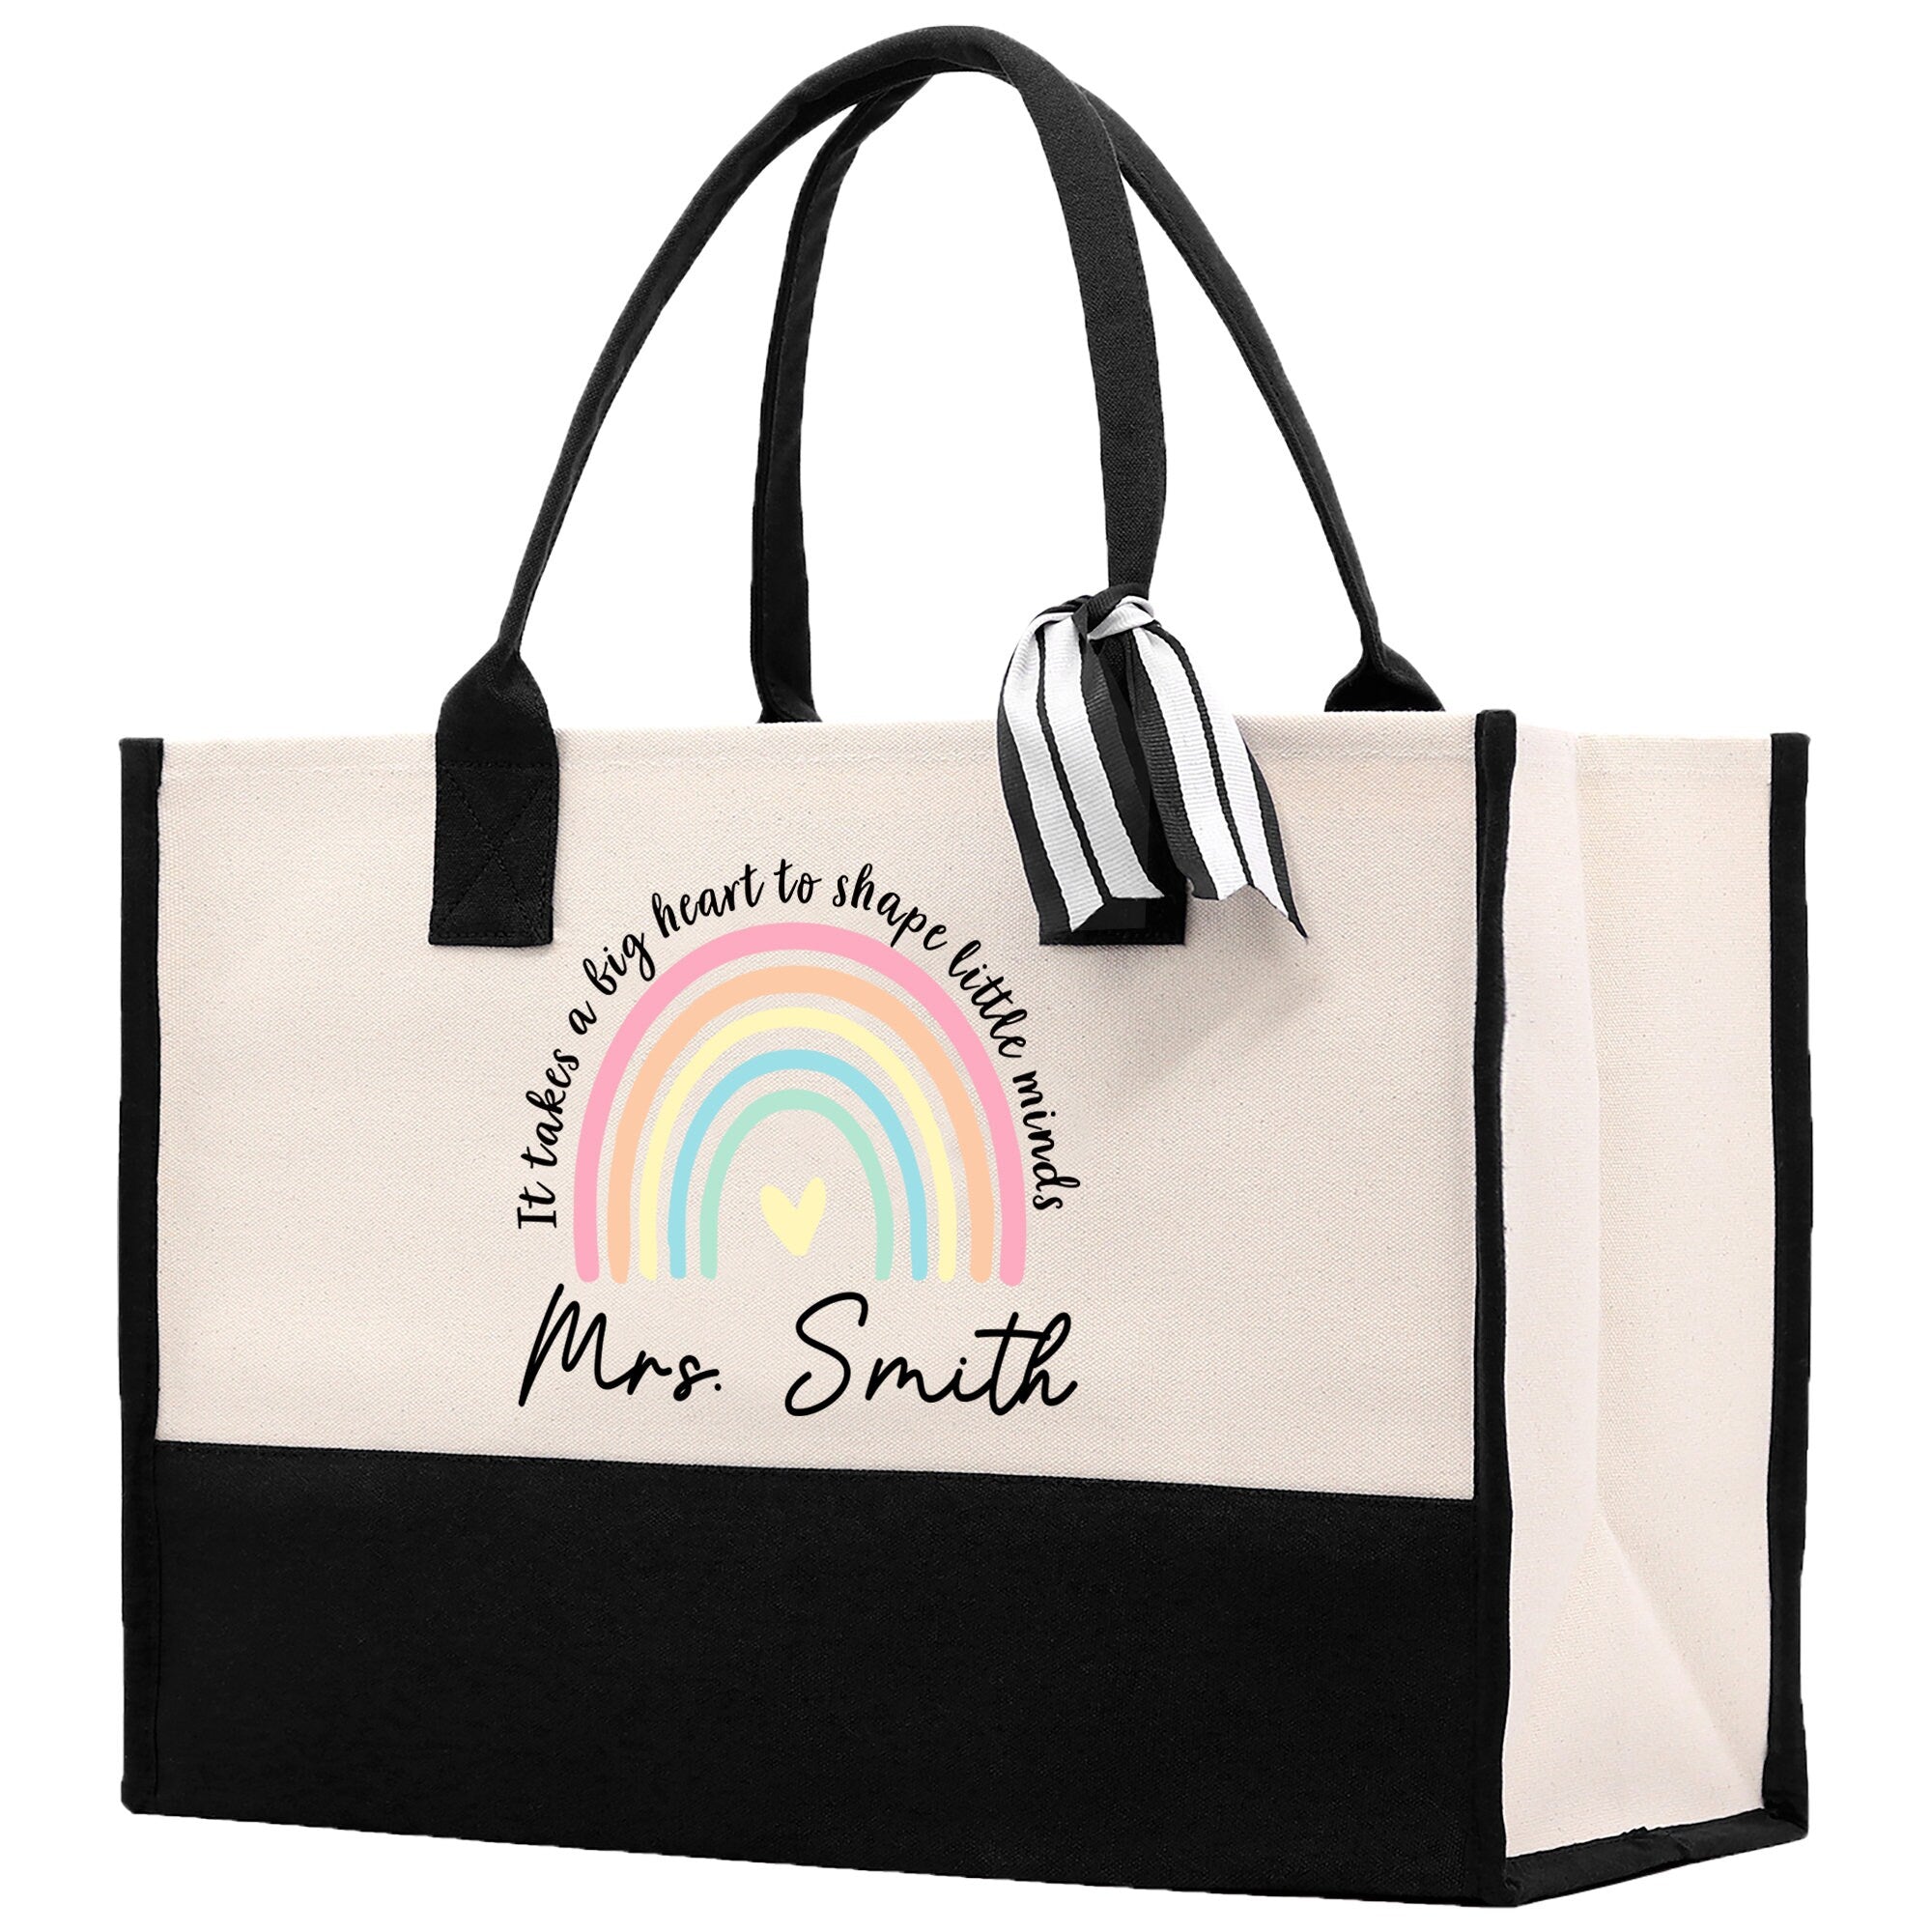 a black and white bag with a rainbow on it